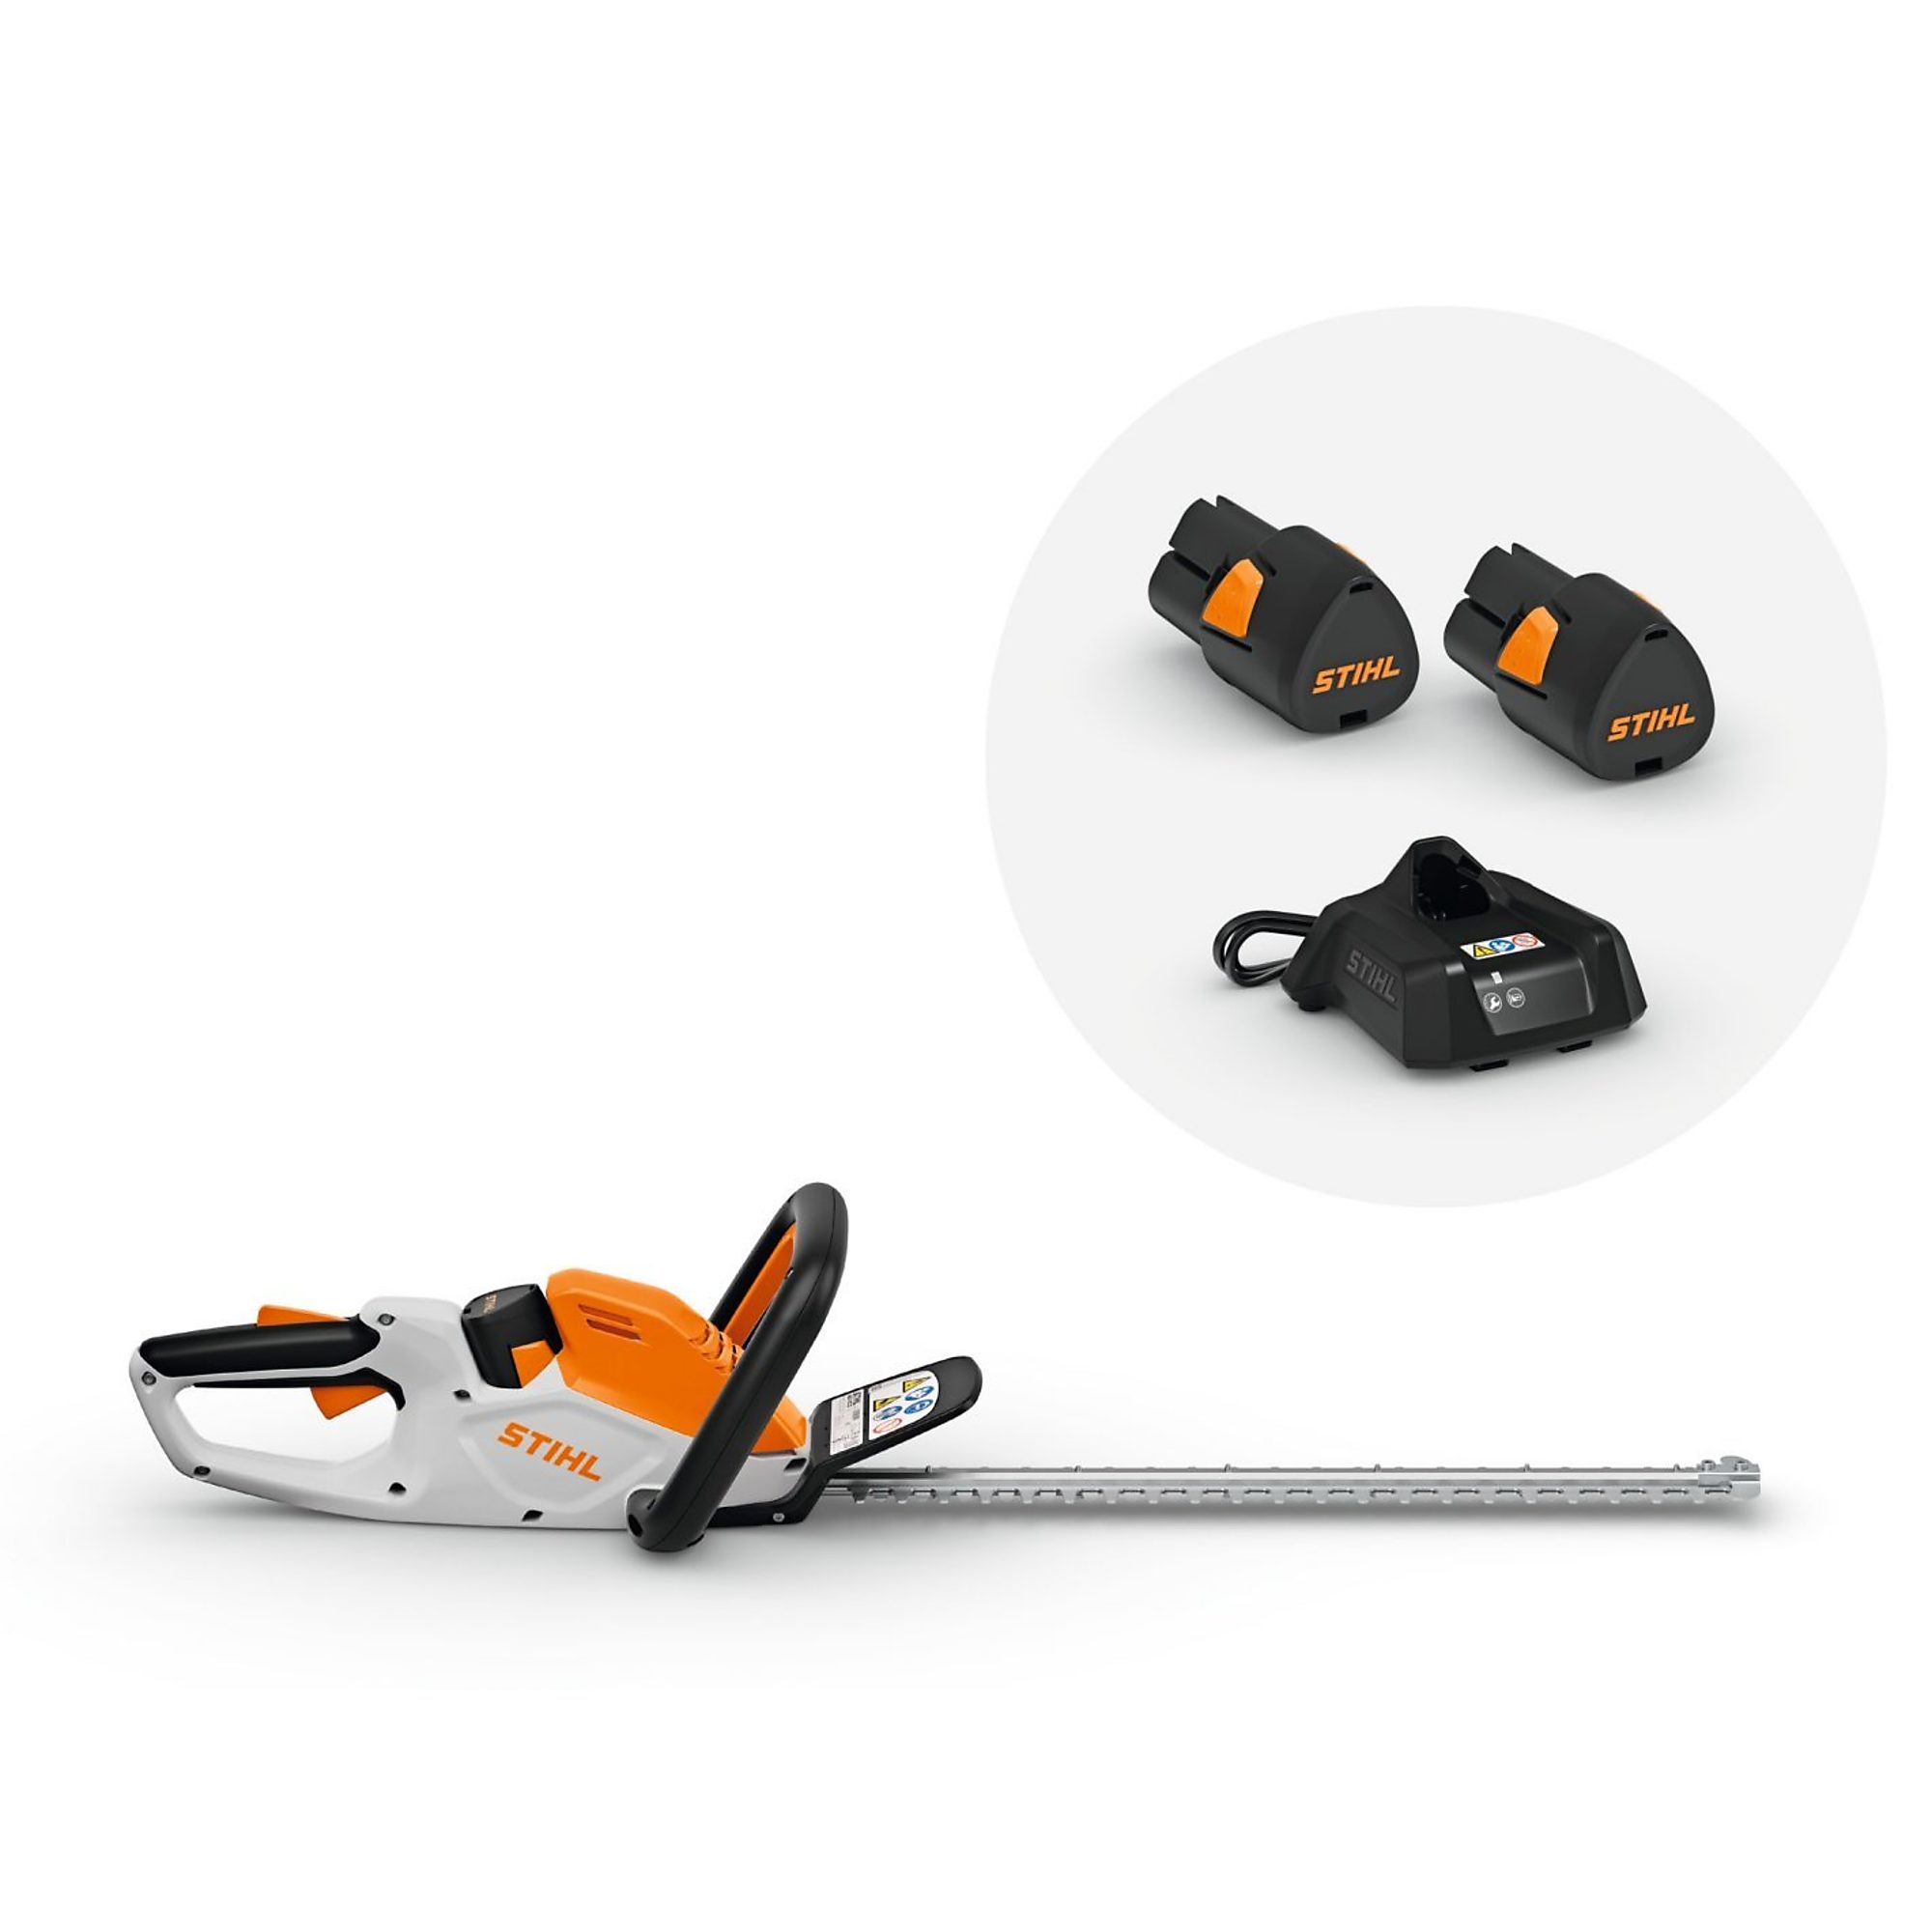 Stihl, Lithium-Ion Hedge Trimmer, Blade Length 18 in, Model HSA 40 SET